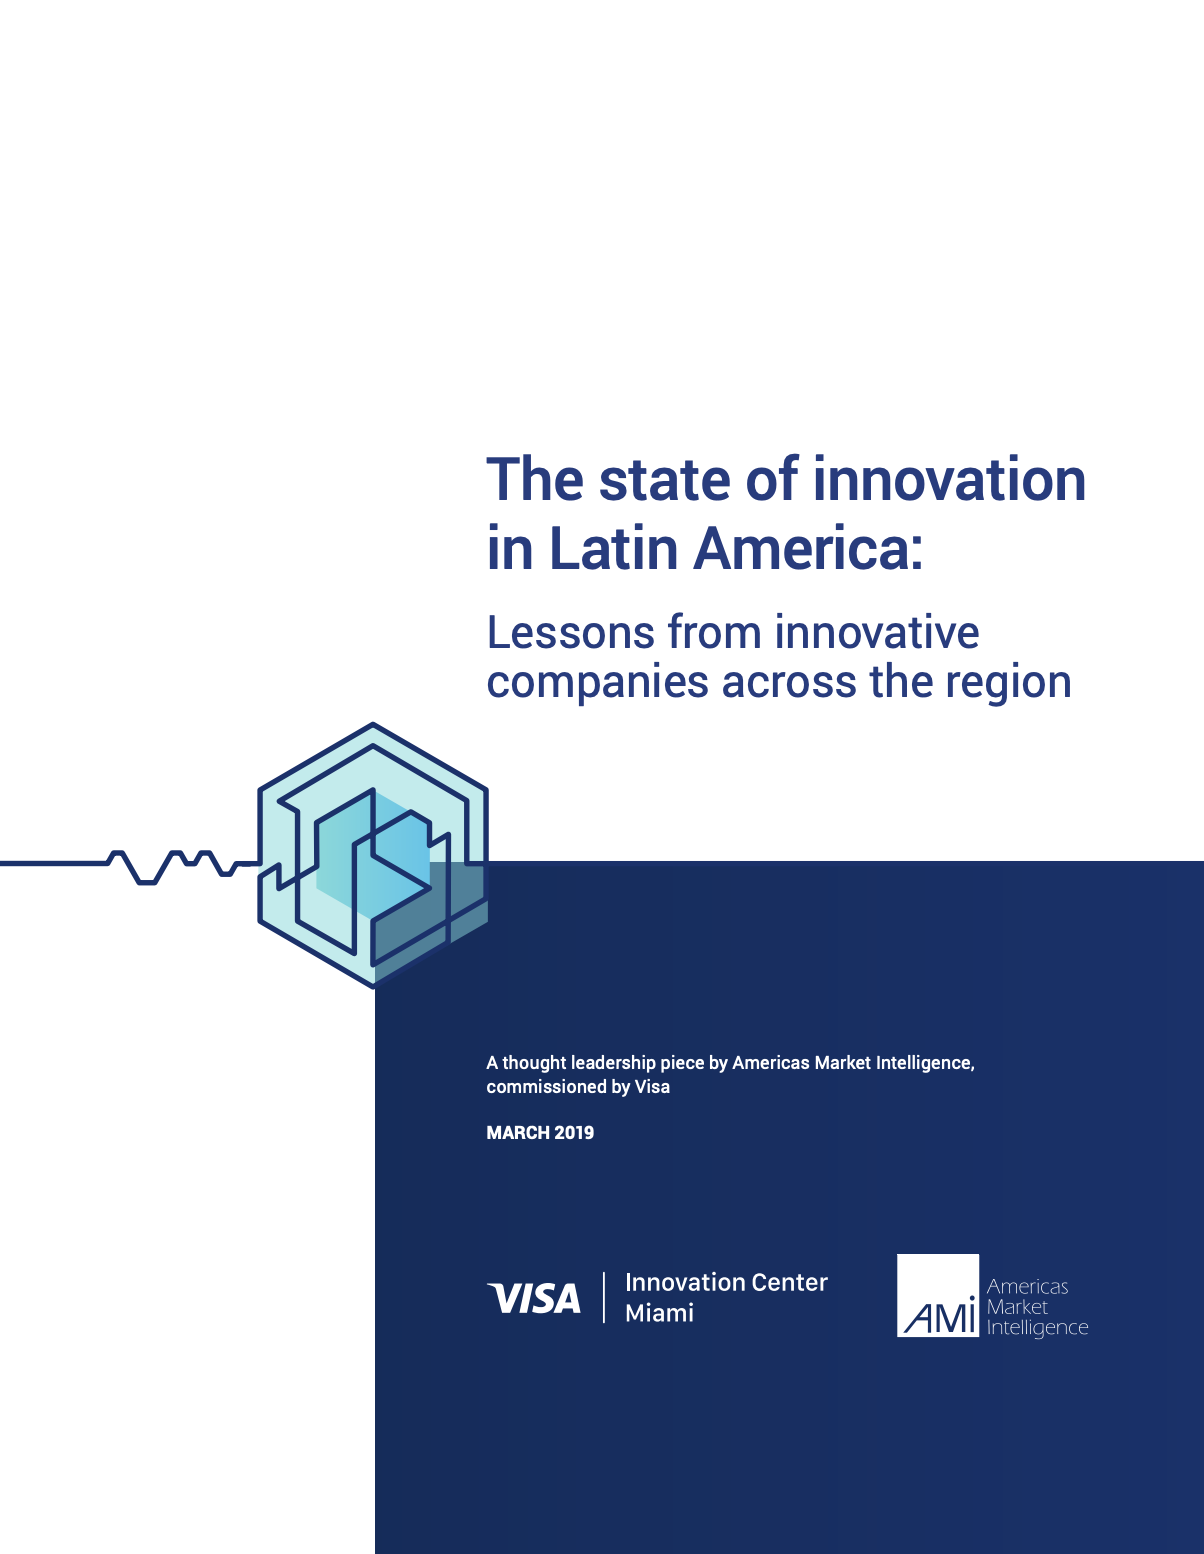 The state of innovation in Latin America: Lessons from innovative companies across the region